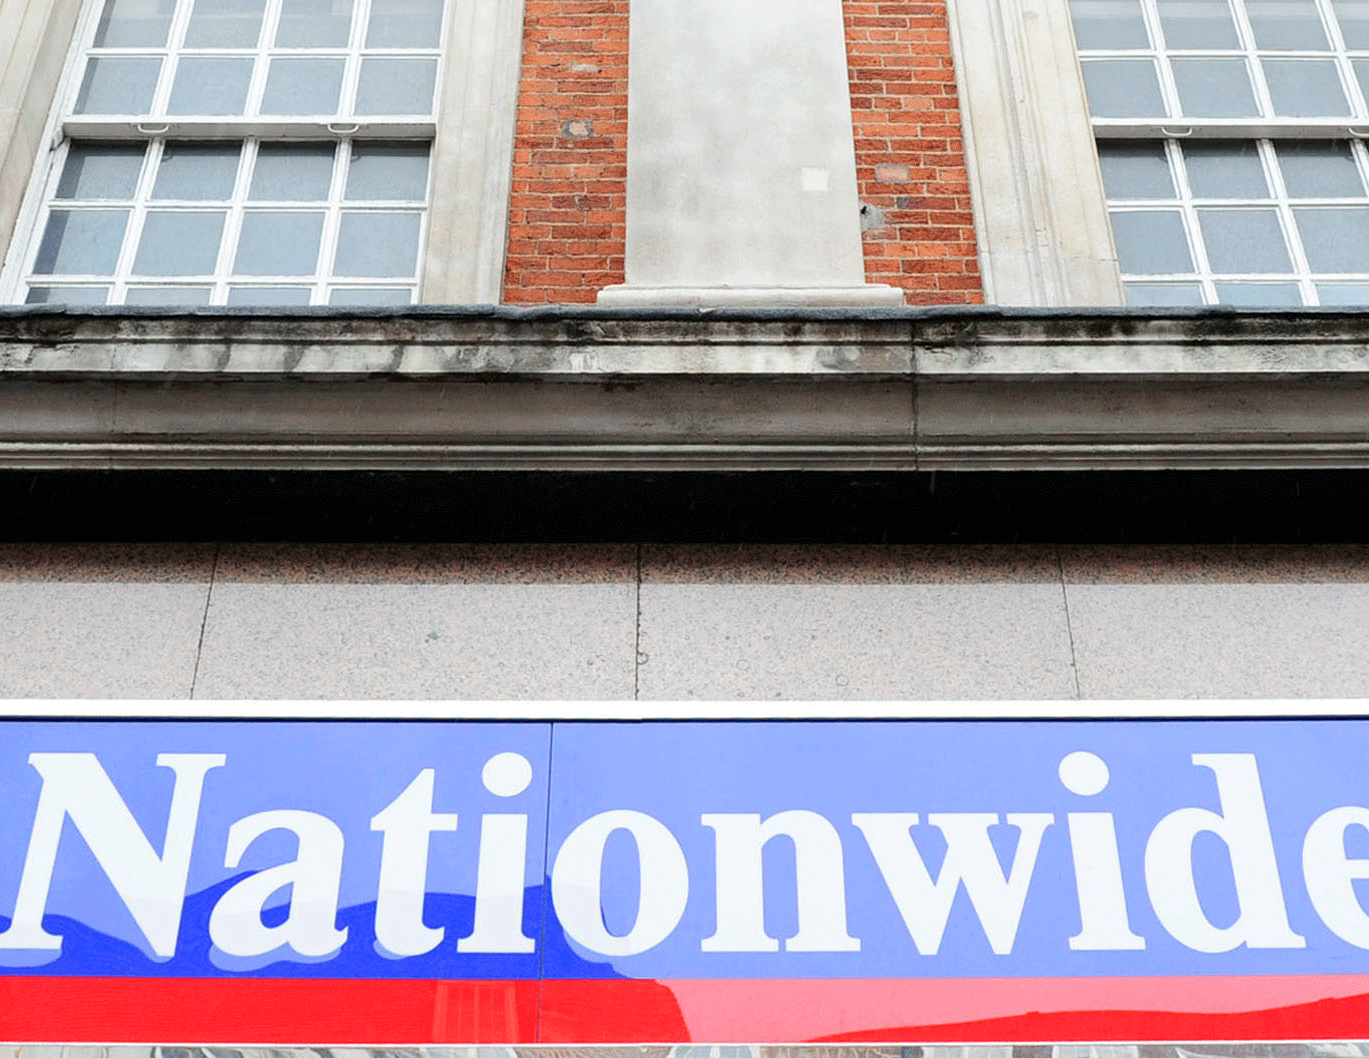 Nationwide said it would close other businesses no longer deemed central to its model